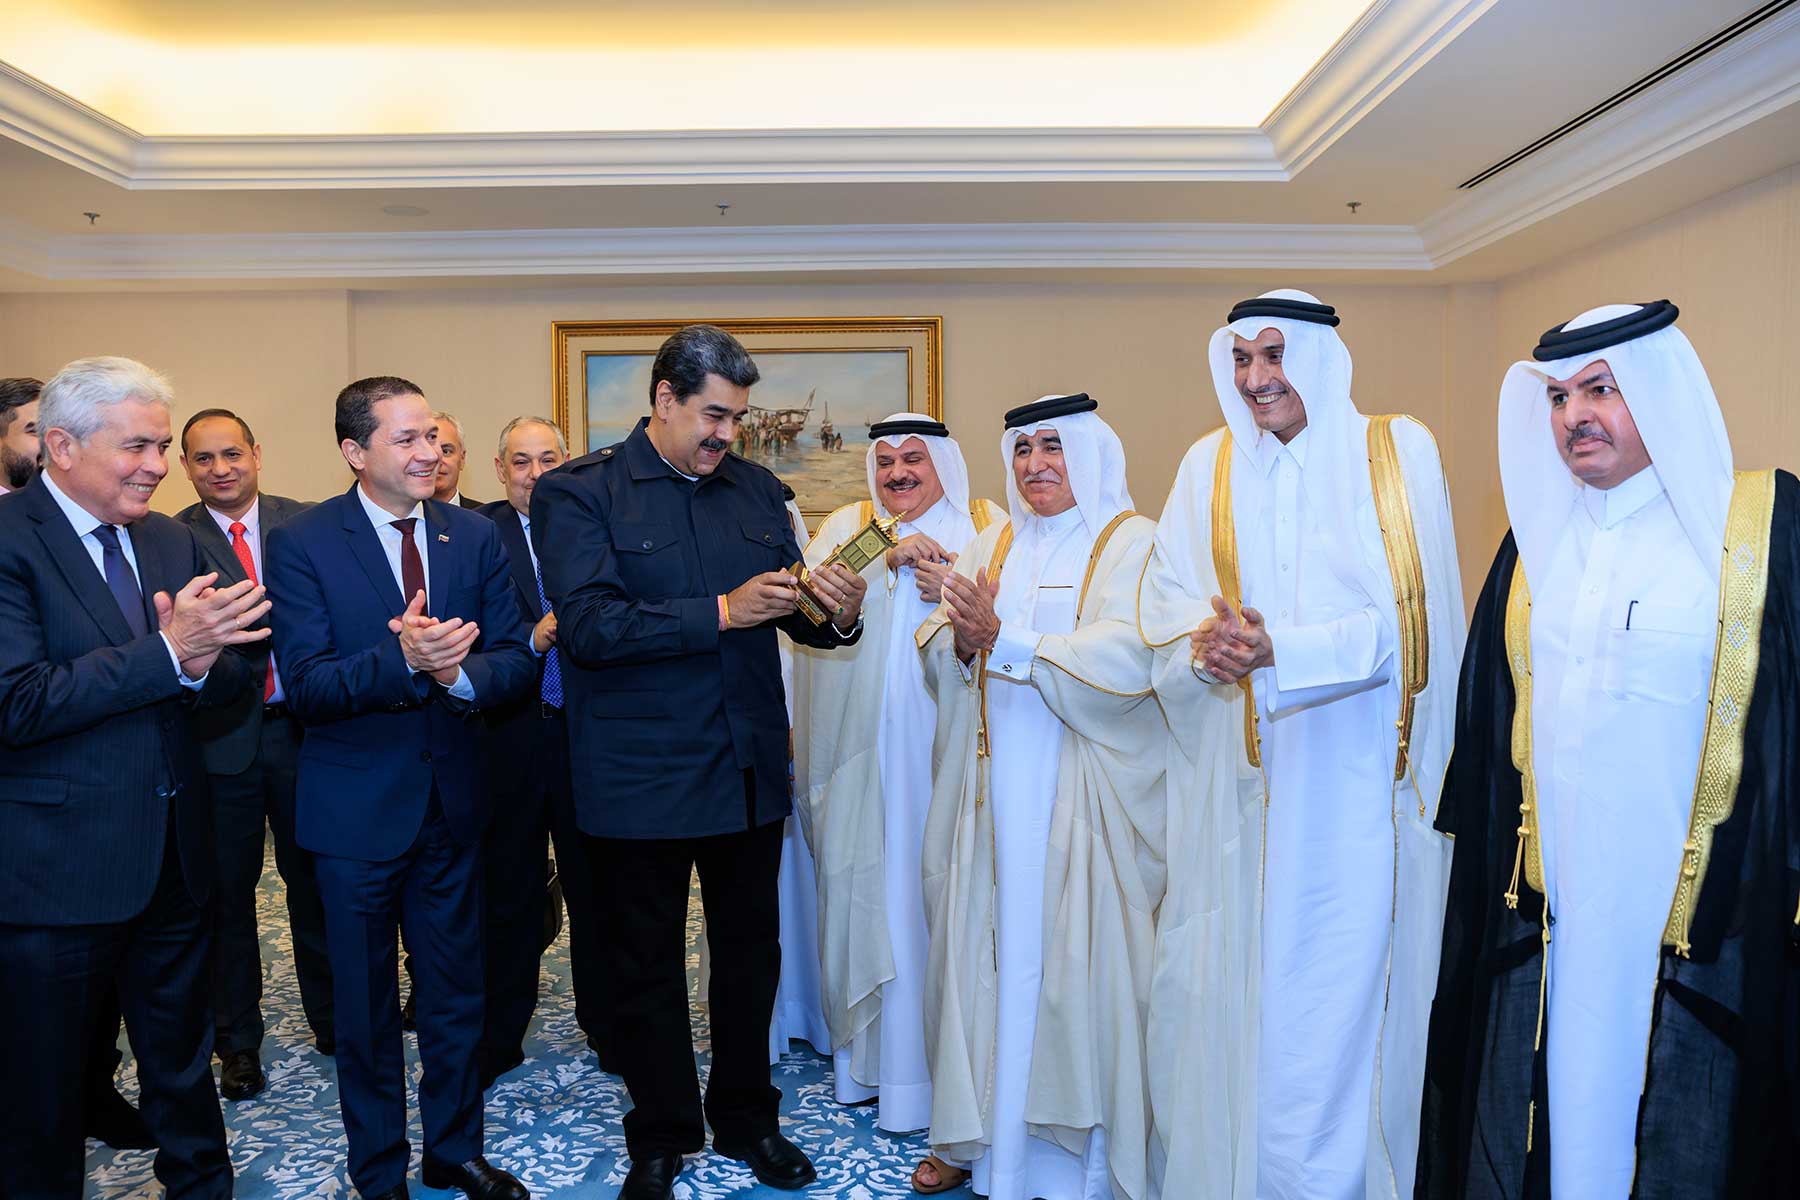 The Meeting of the Qatari Businessmen Association with His Excellency Mr. Nicolas Maduro, President of the Bolivarian Republic of Venezuela